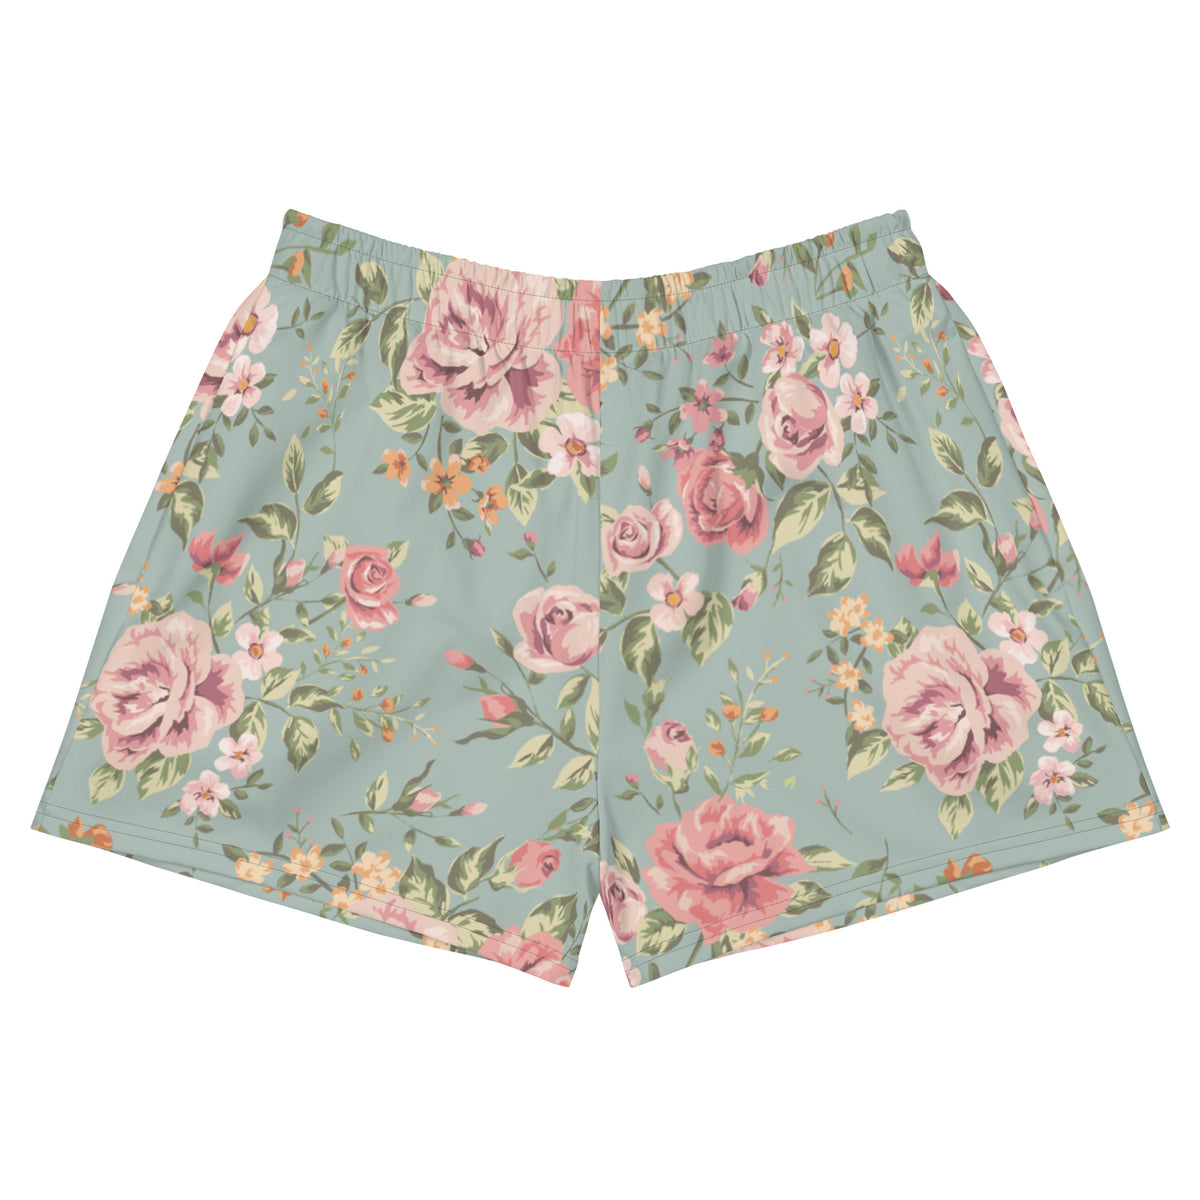 Floral Women’s Athletic Shorts